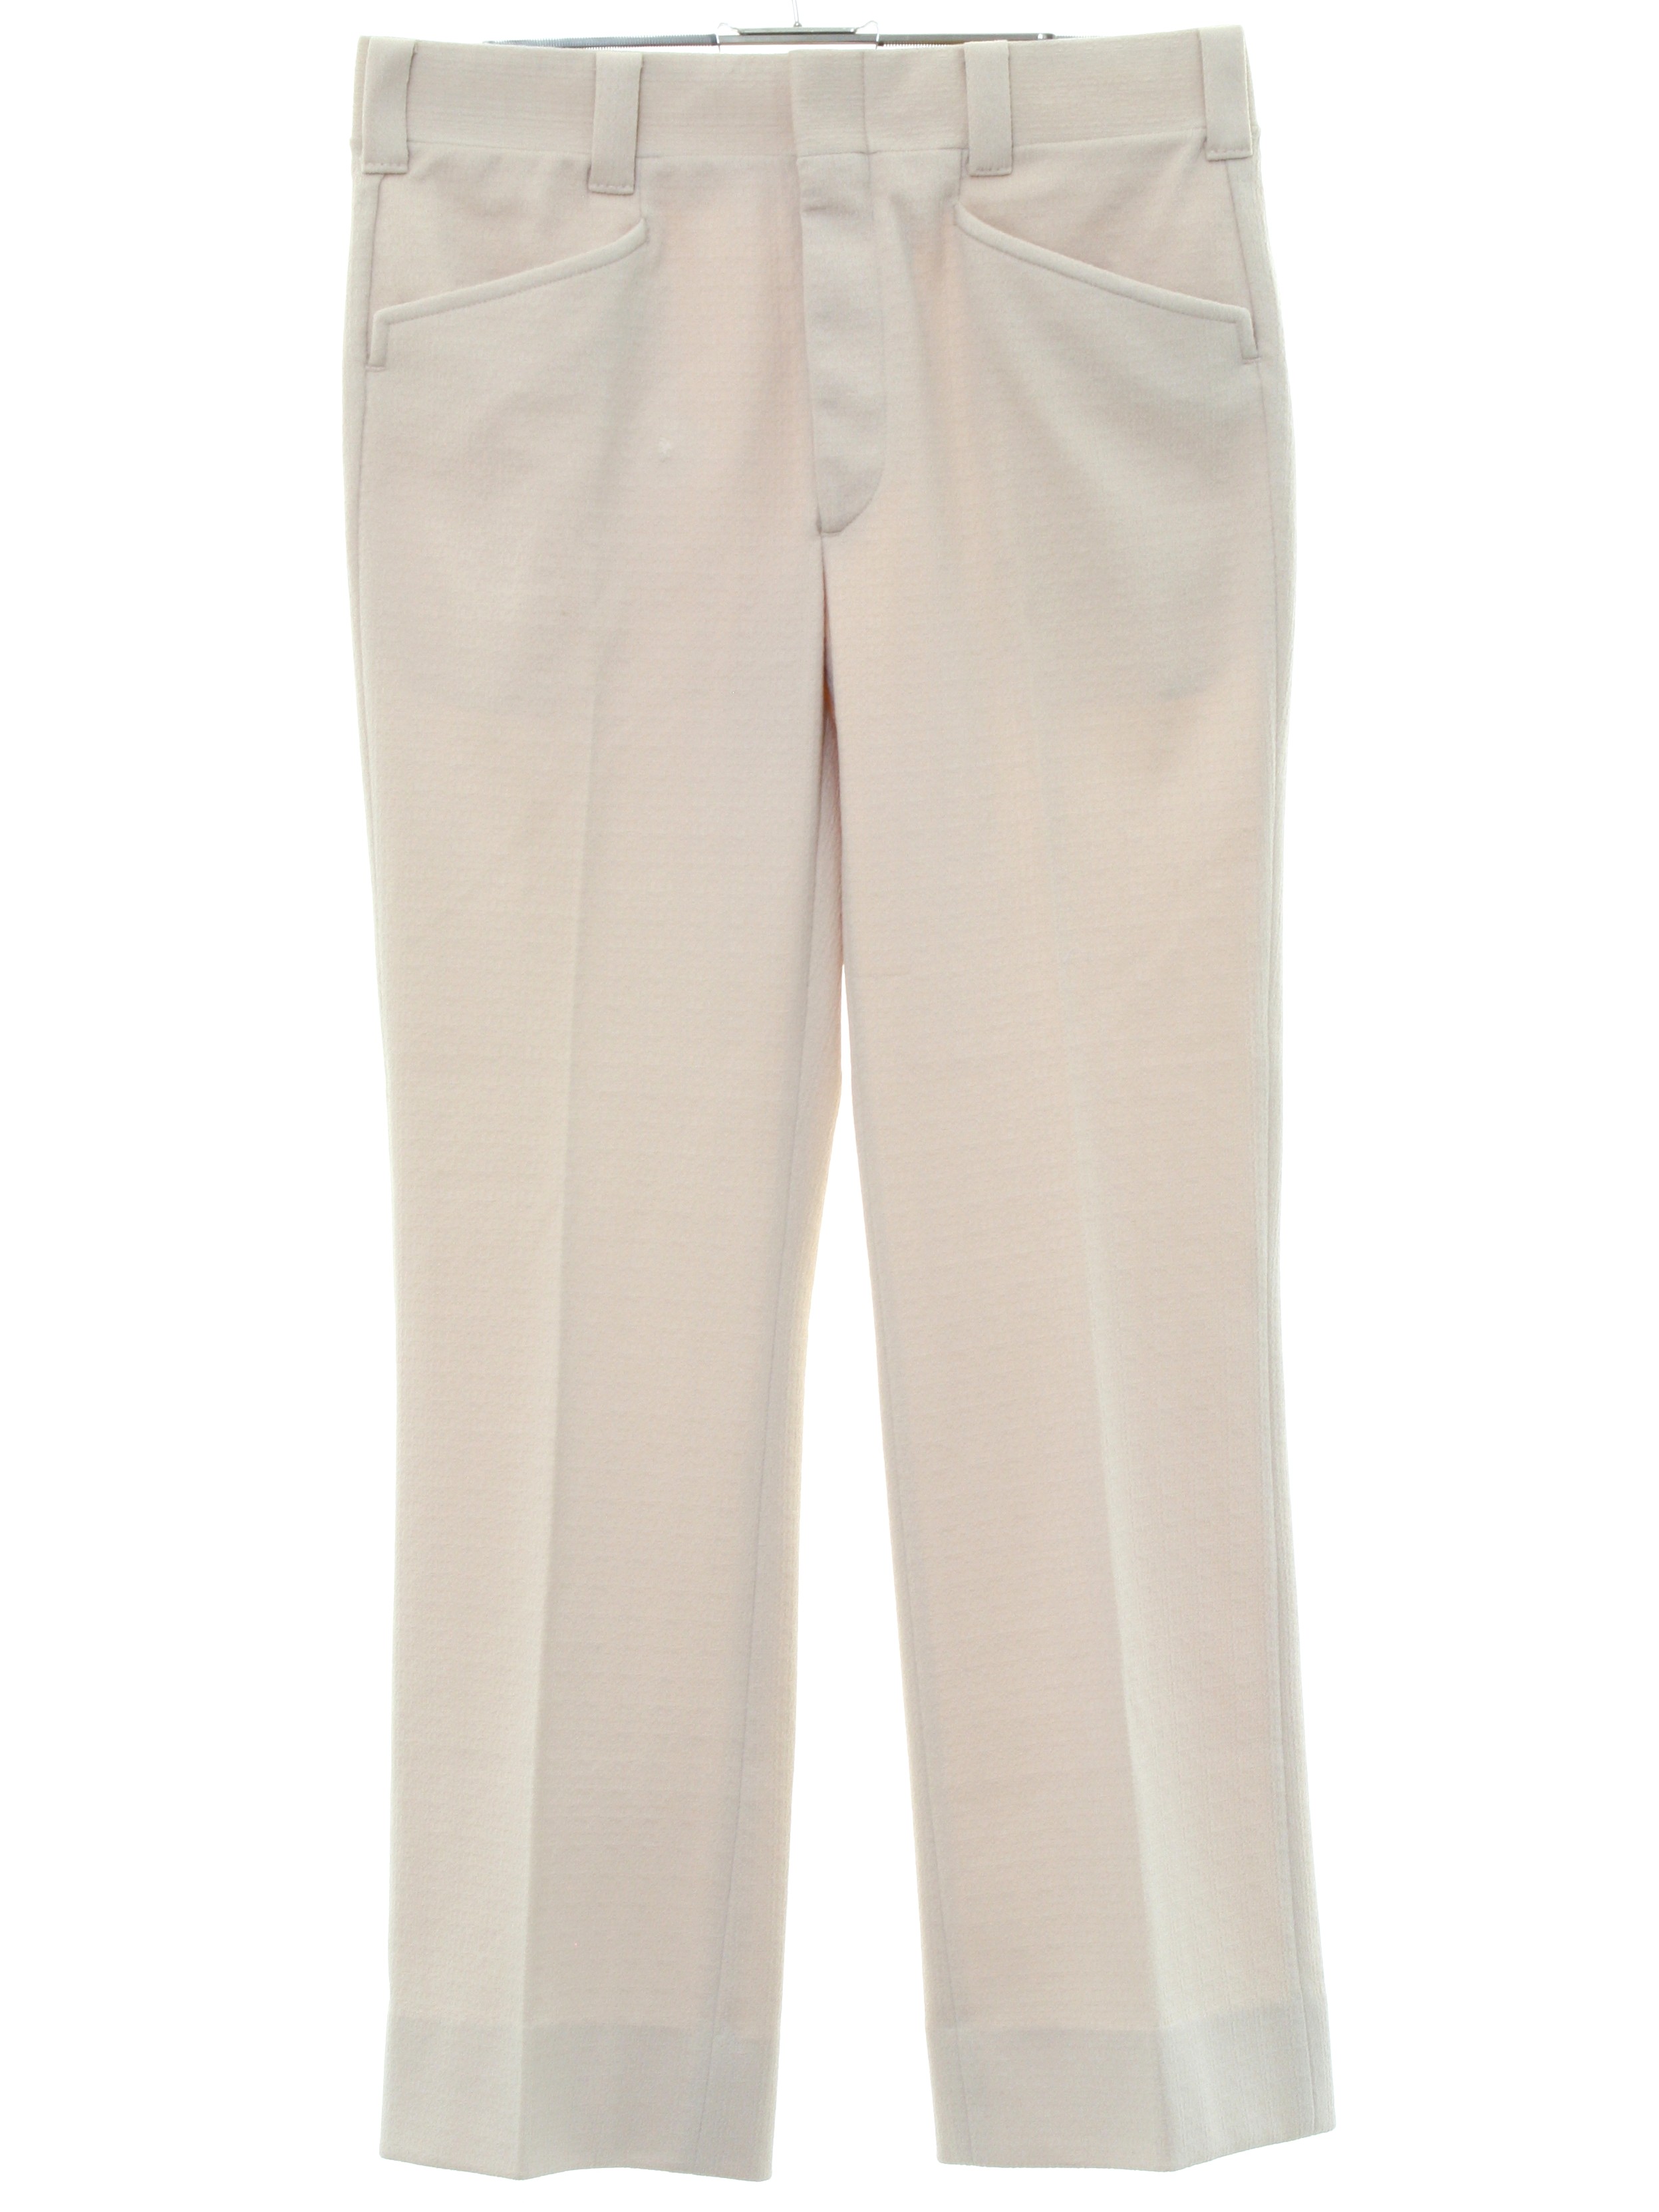 1970's Retro Flared Pants / Flares: 70s -Care Label- Mens cream solid ...